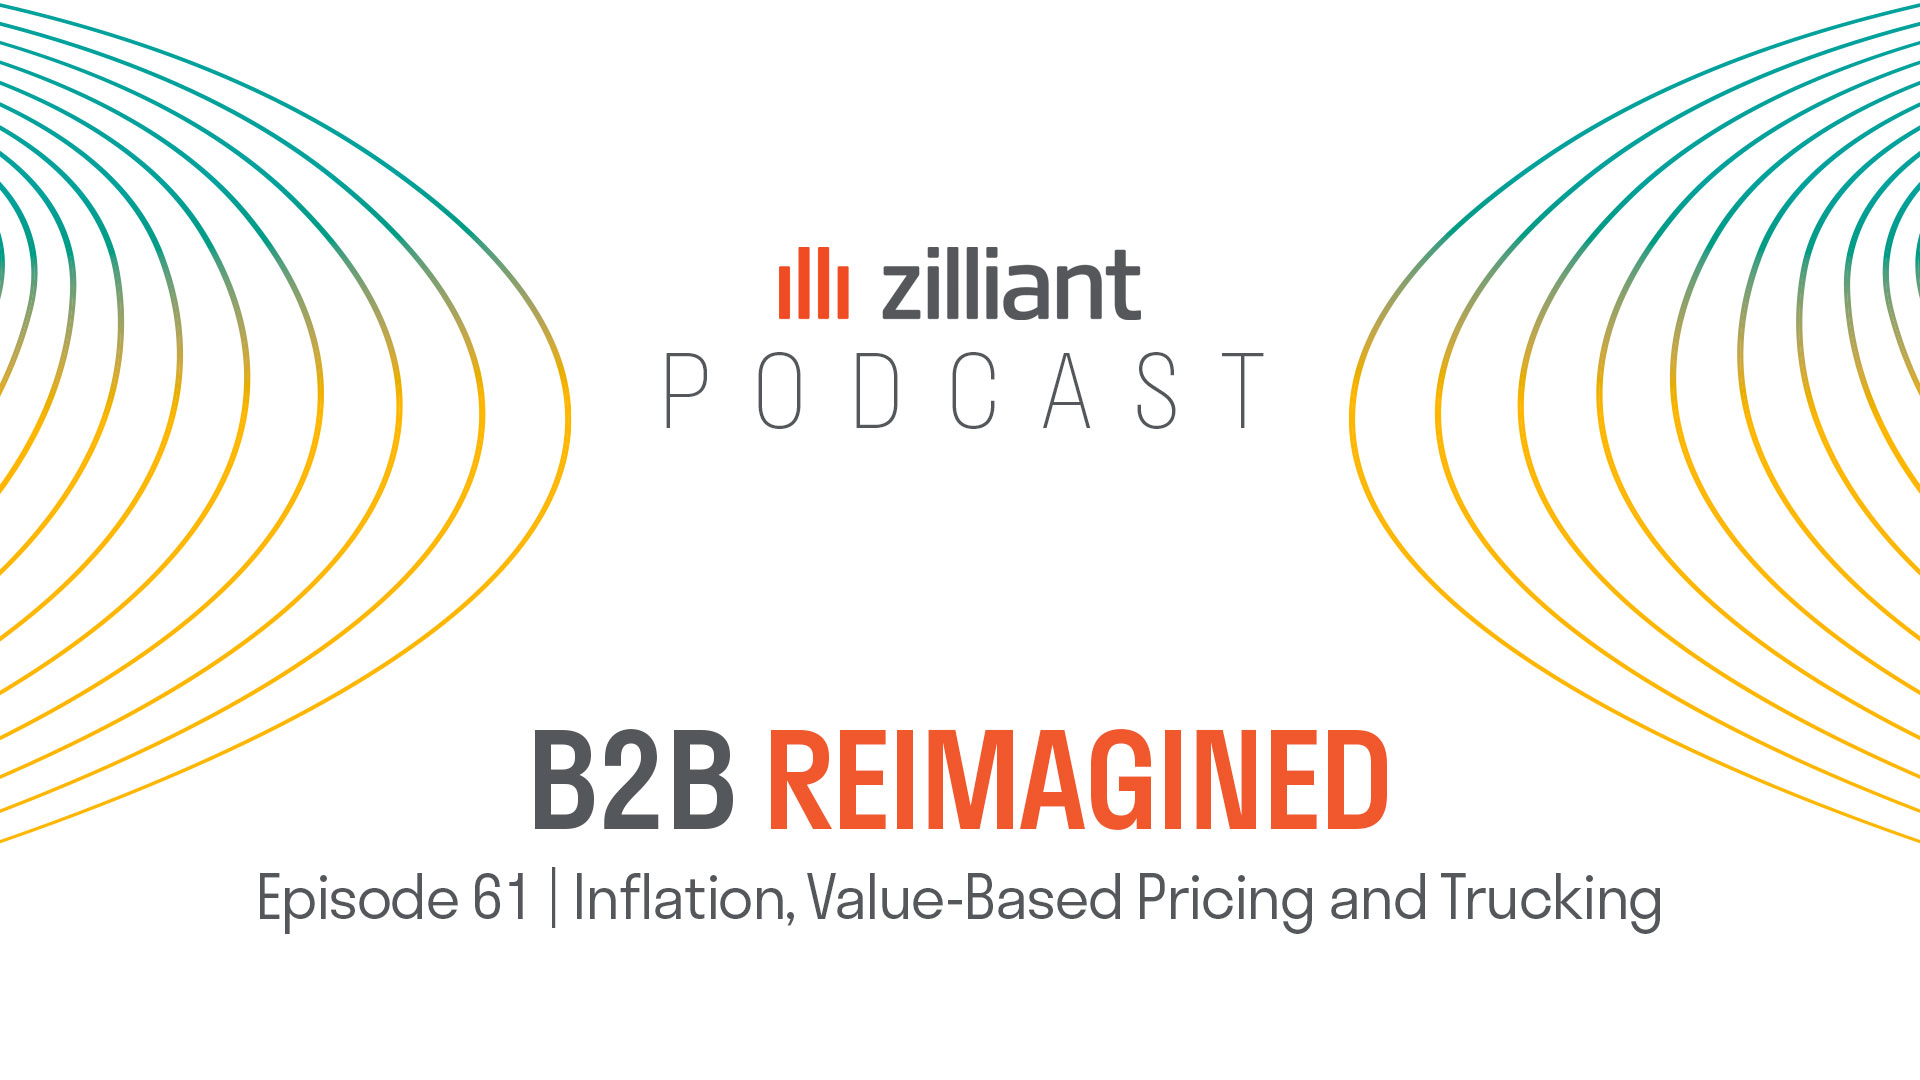 Inflation, Value-Based Pricing and Trucking